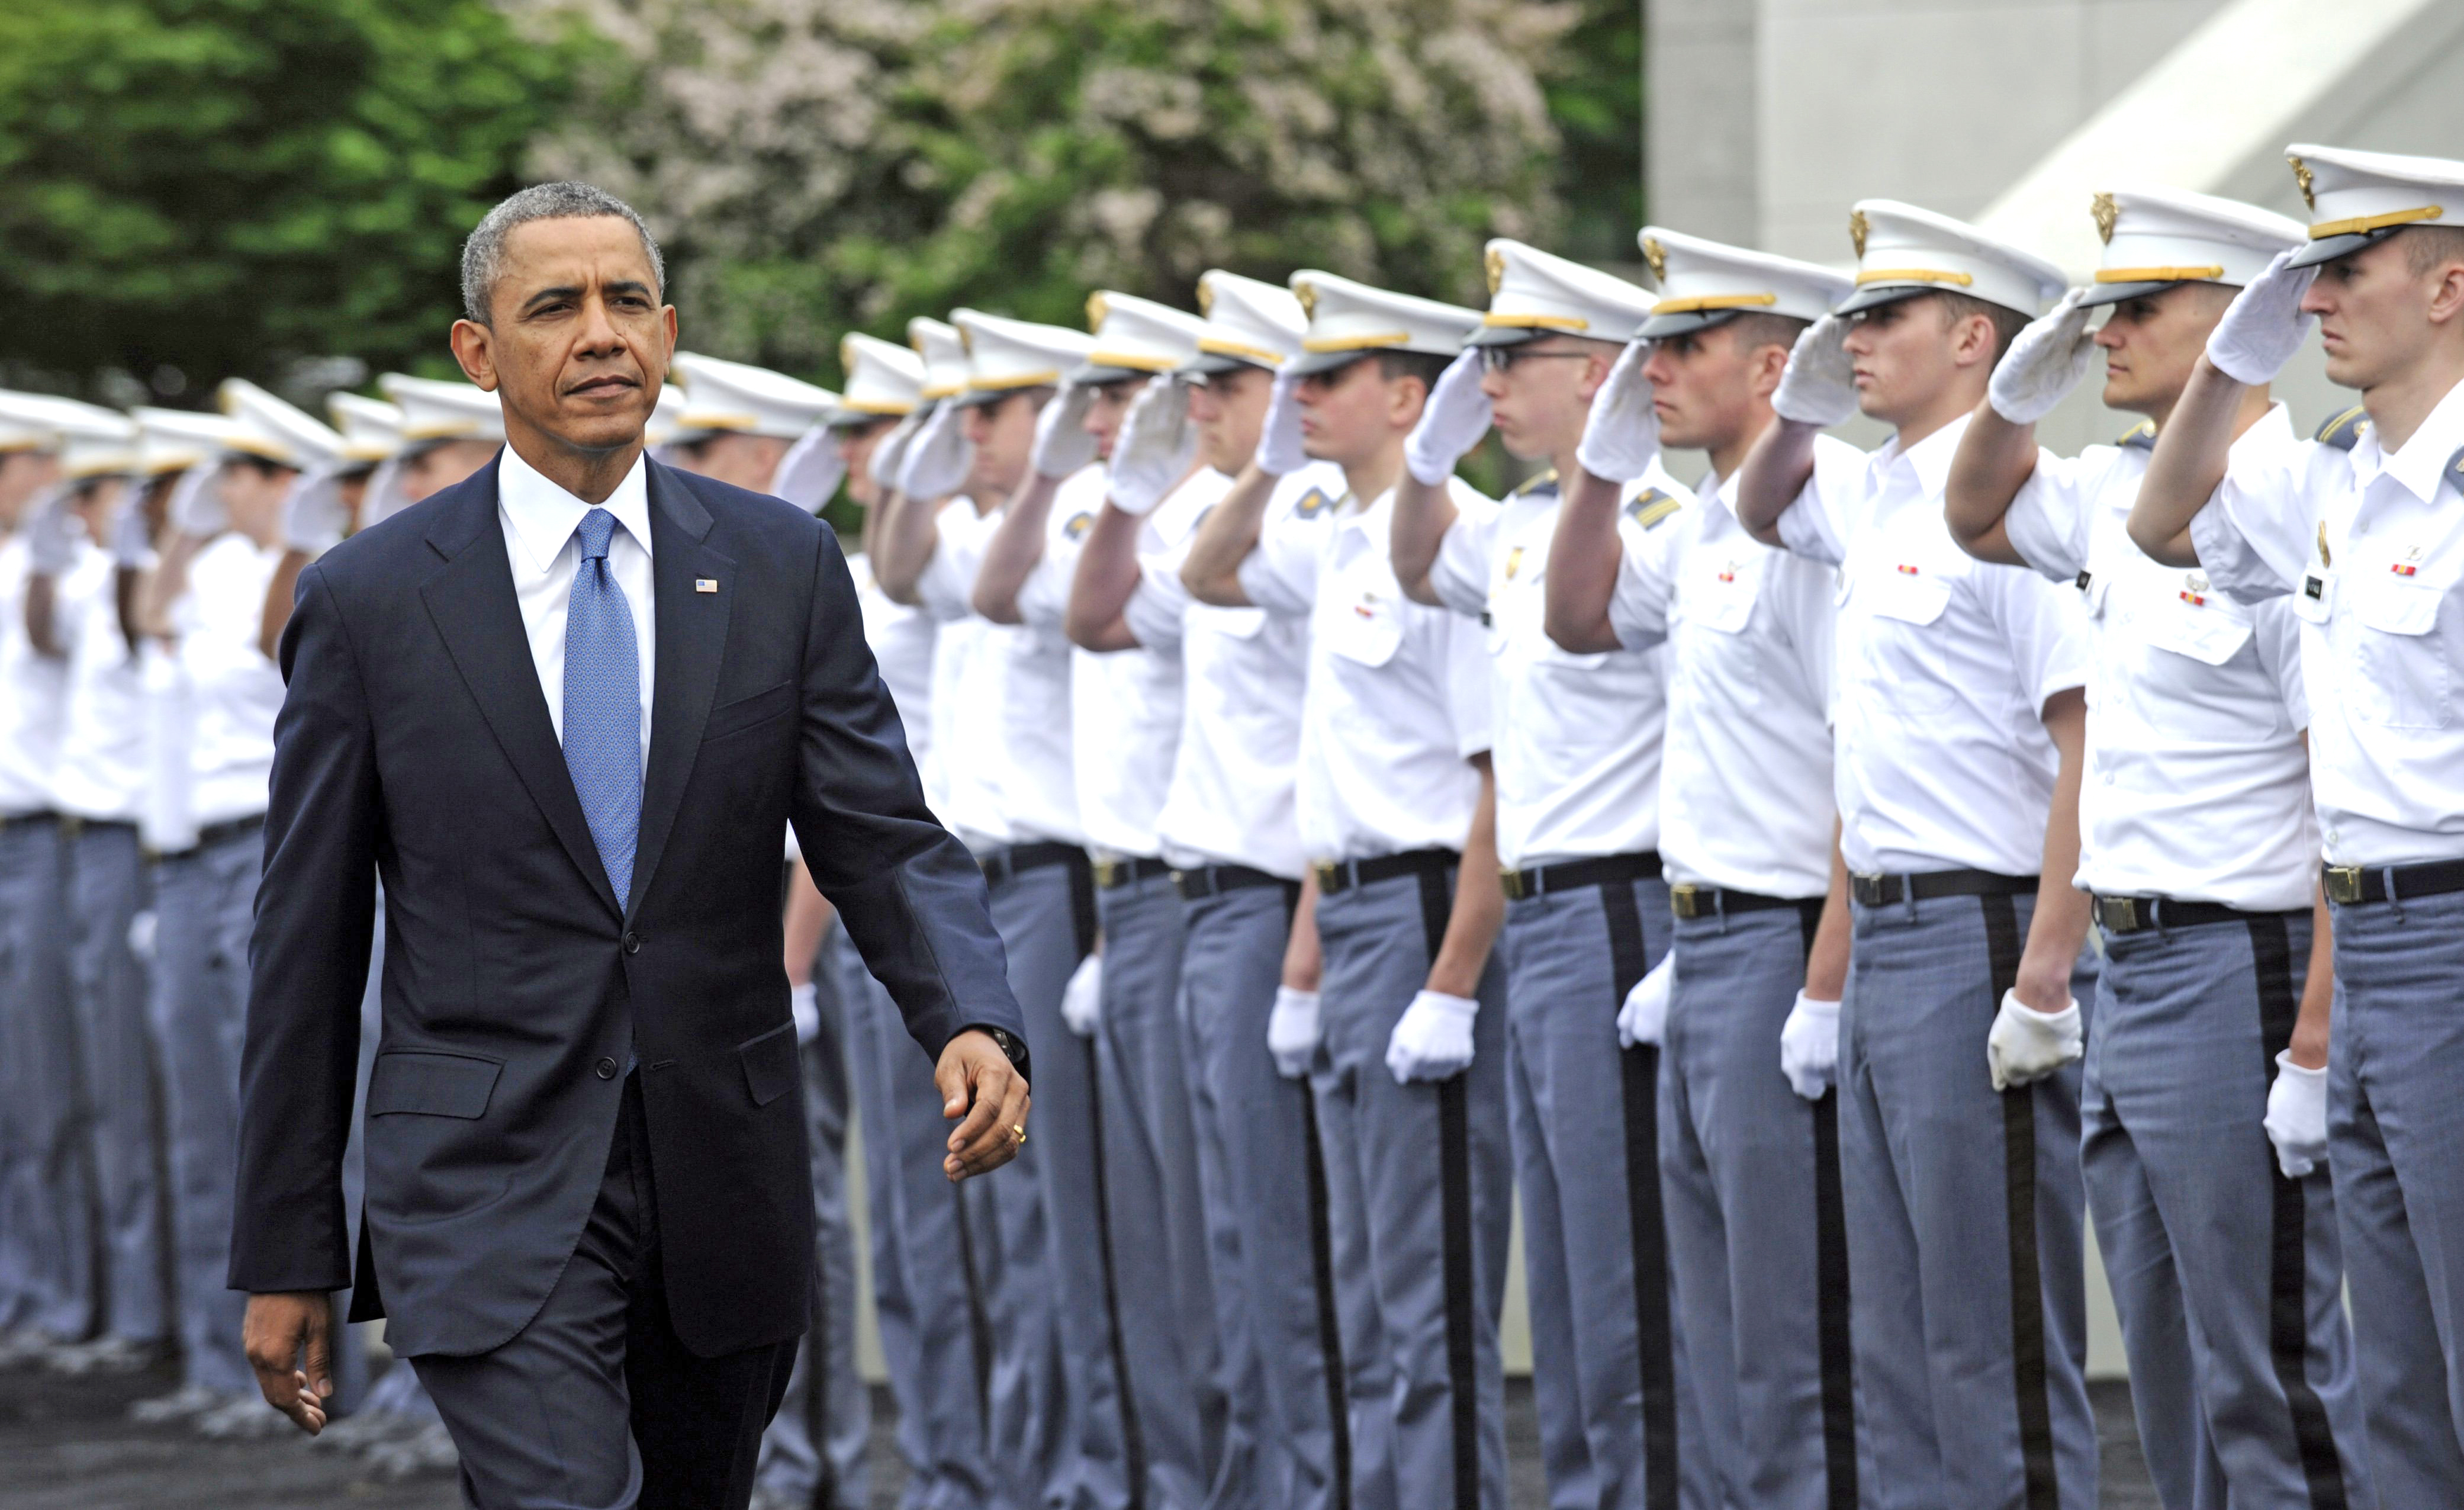 U.S. President Barack Obama arrives to deliver the commencement address to the U.S. Military Academy at West Point's Class of 2014 on May 28, 2014, in West Point, N.Y.